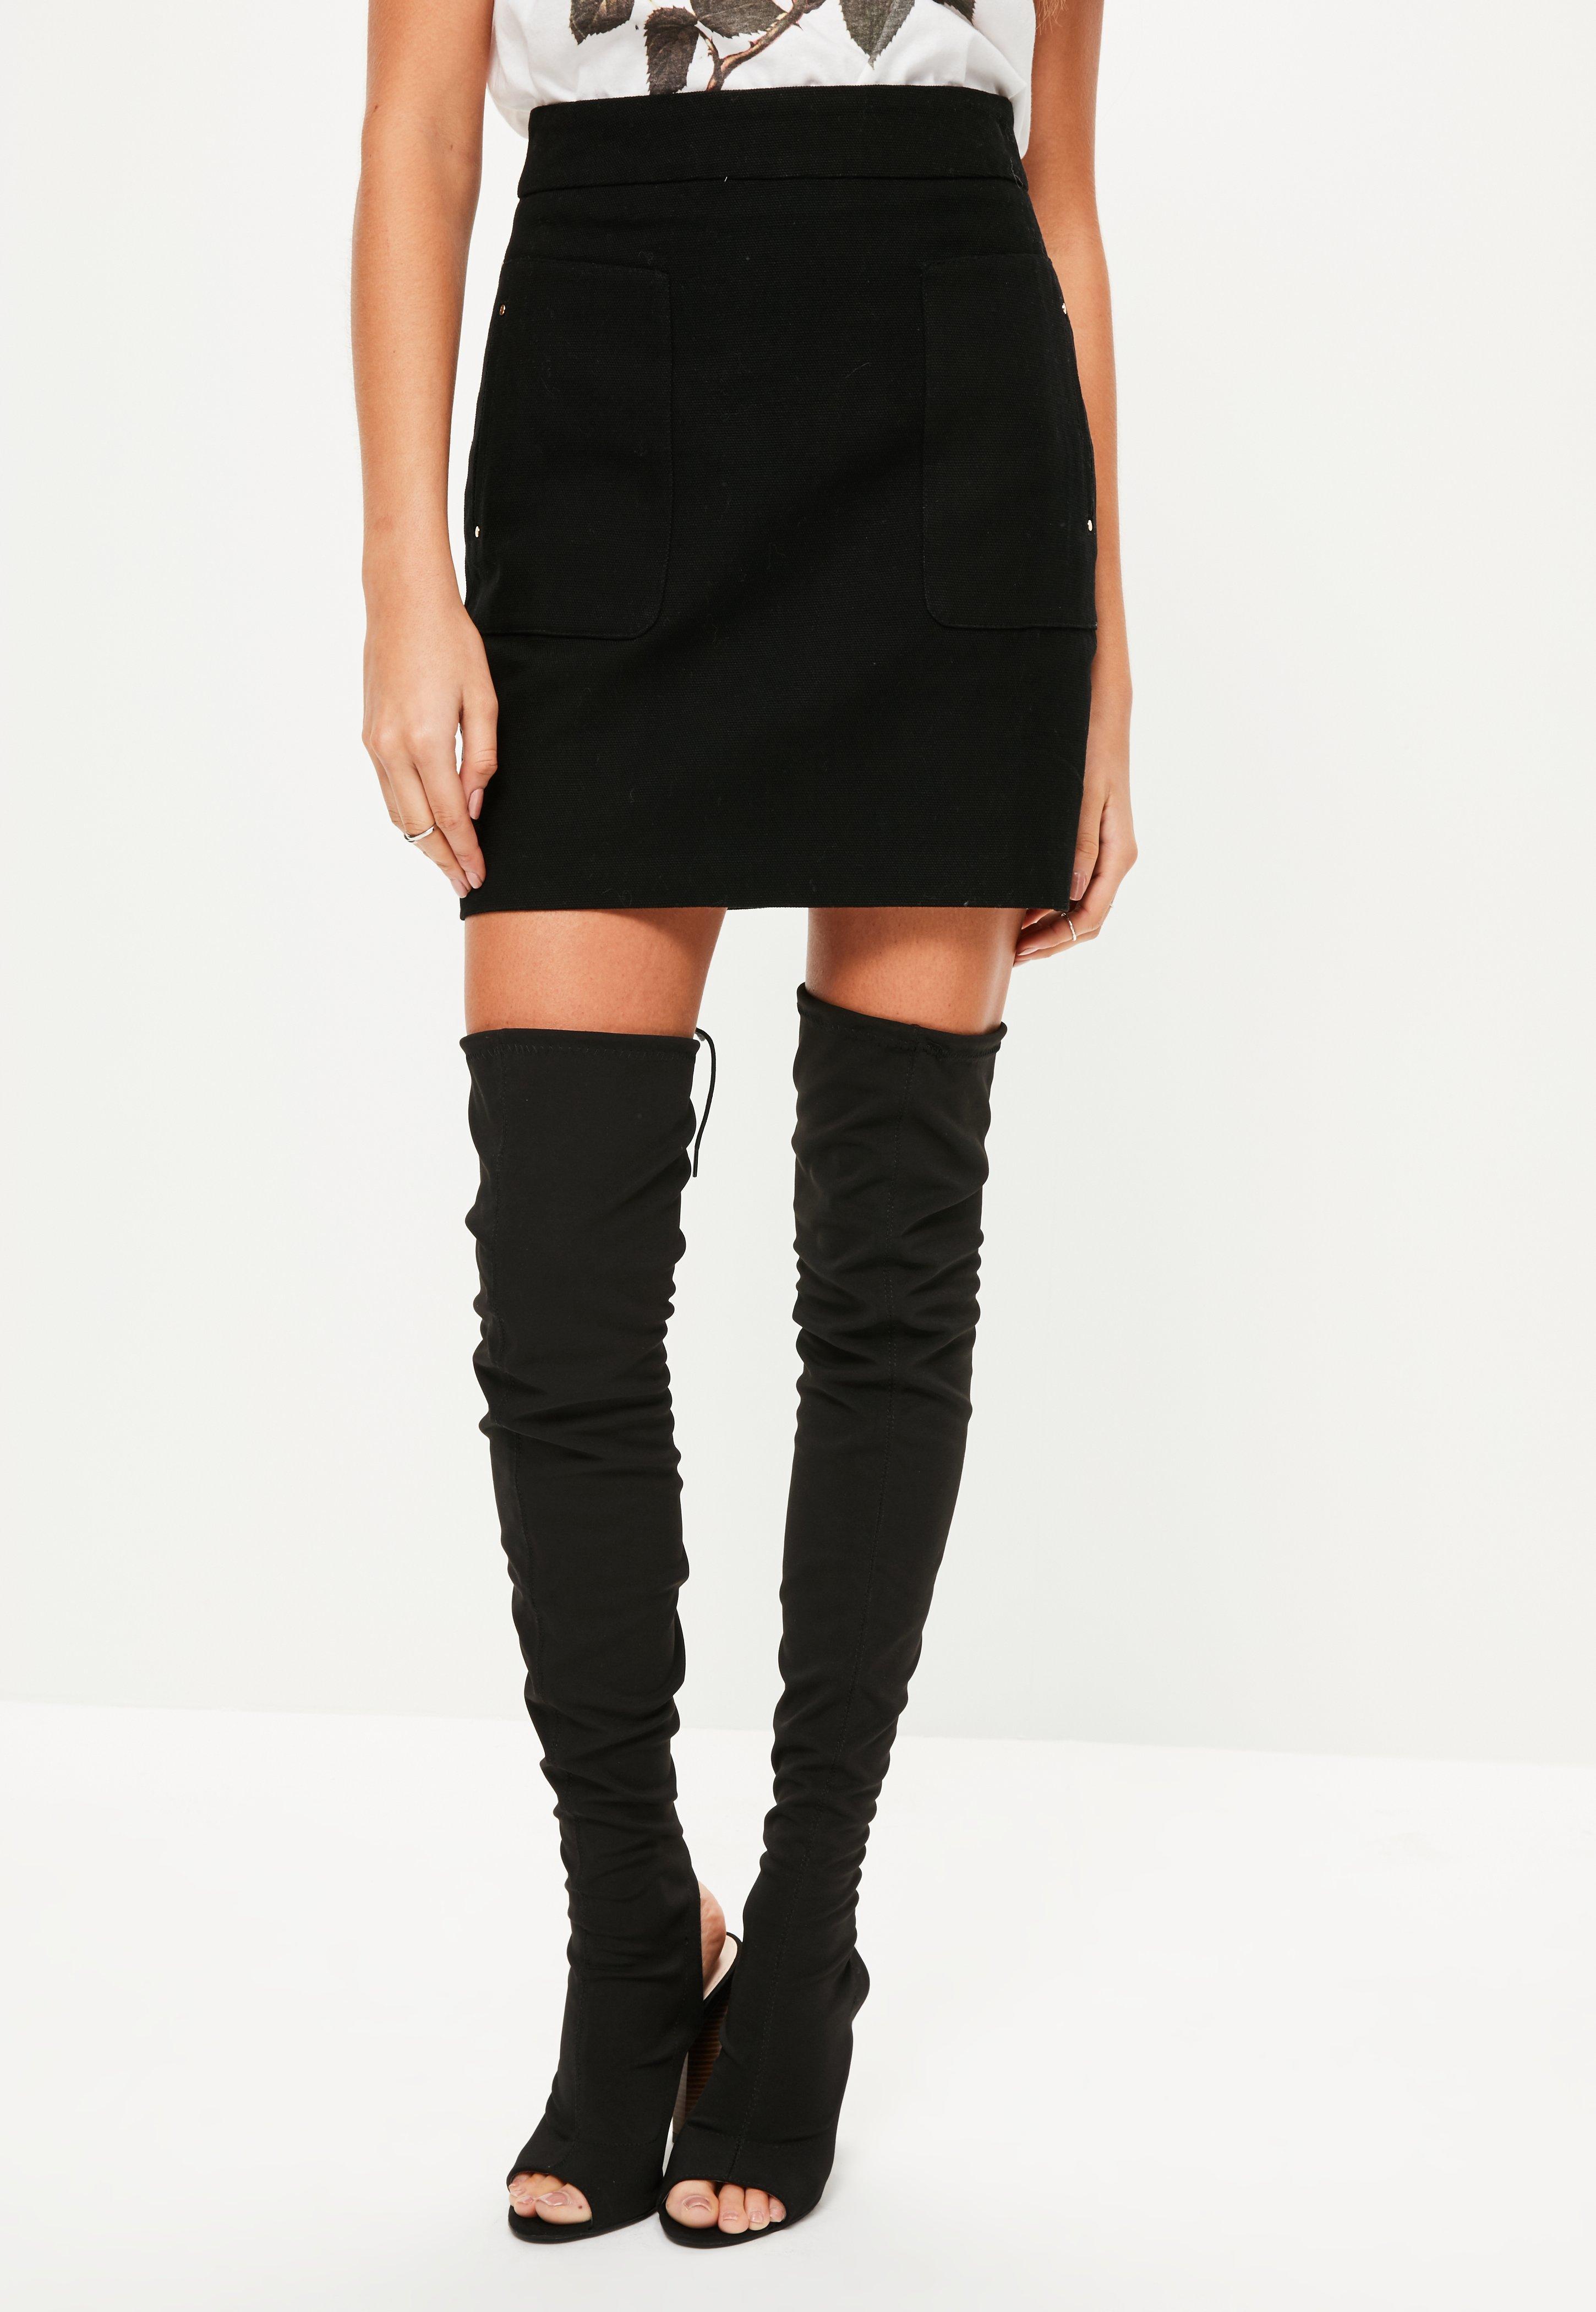 Missguided Black Textured Cotton A Line Mini Skirt in Black | Lyst